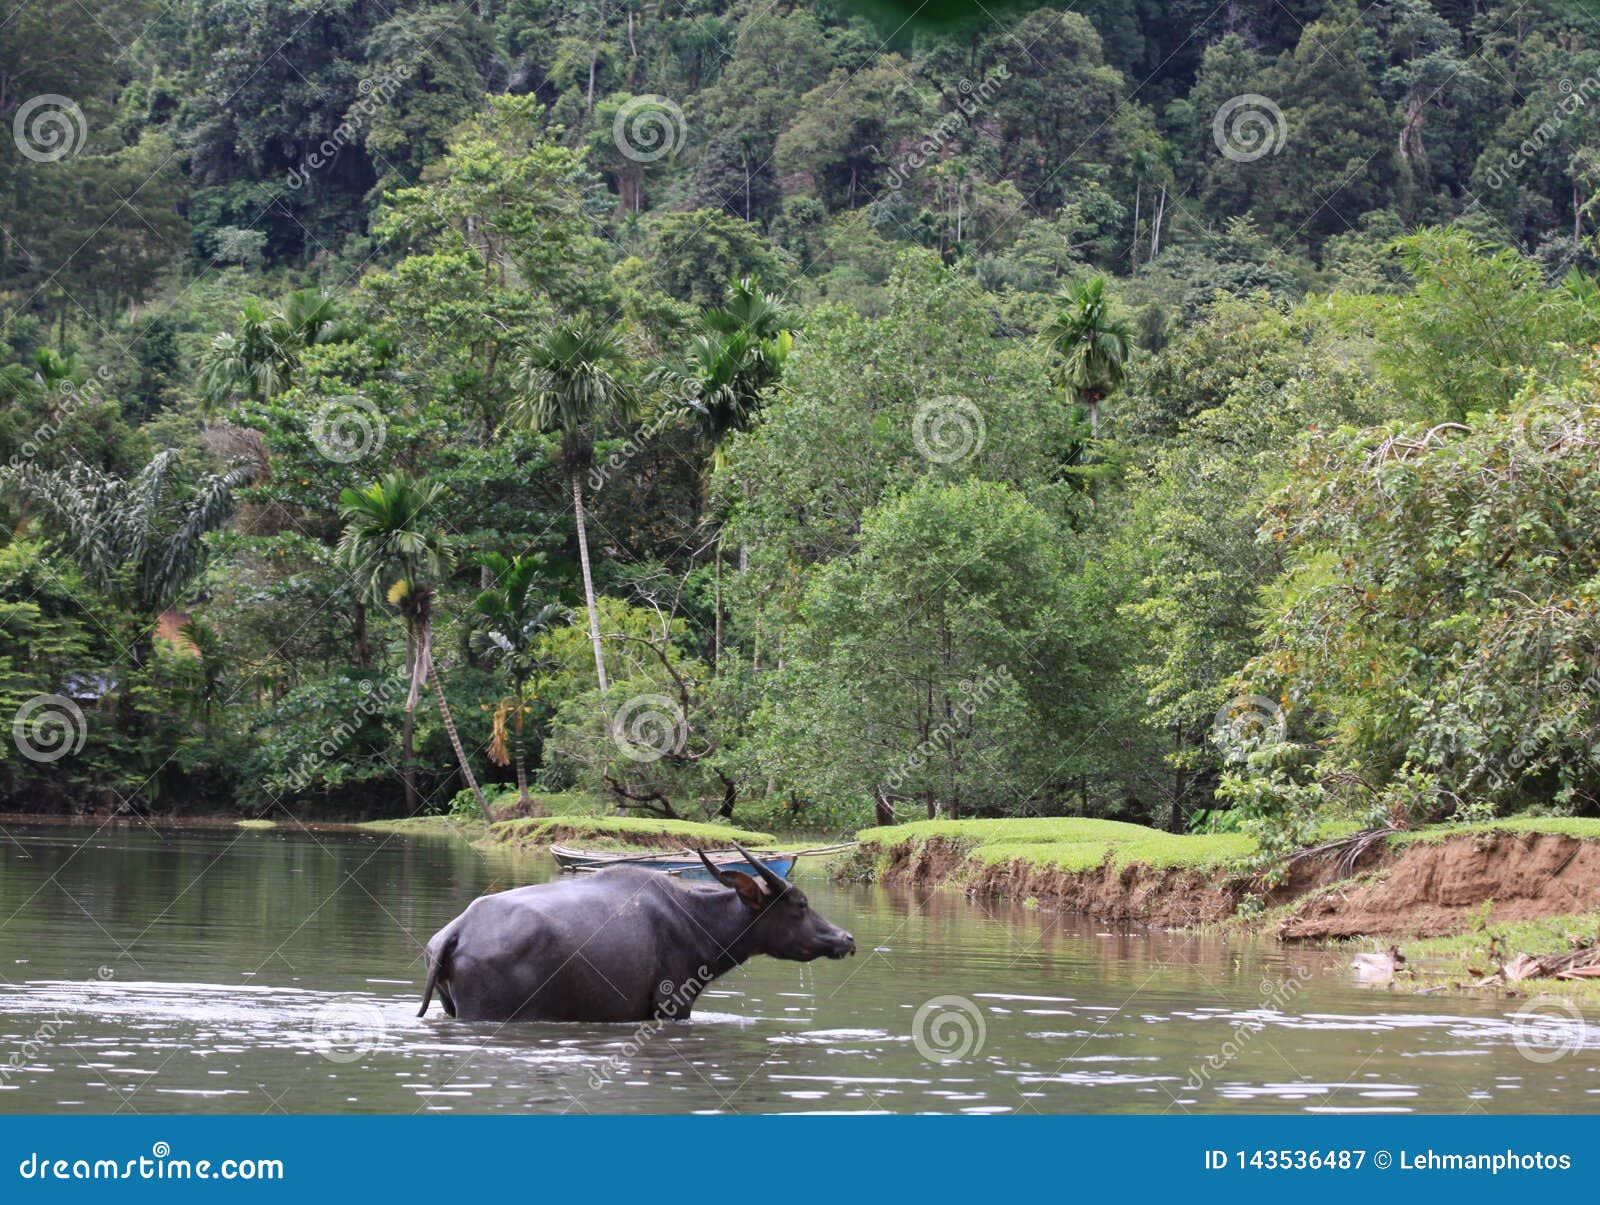 A Water Buffalo Walking Across River in Indonesia Stock Image - Image of environment, graze: 143536487